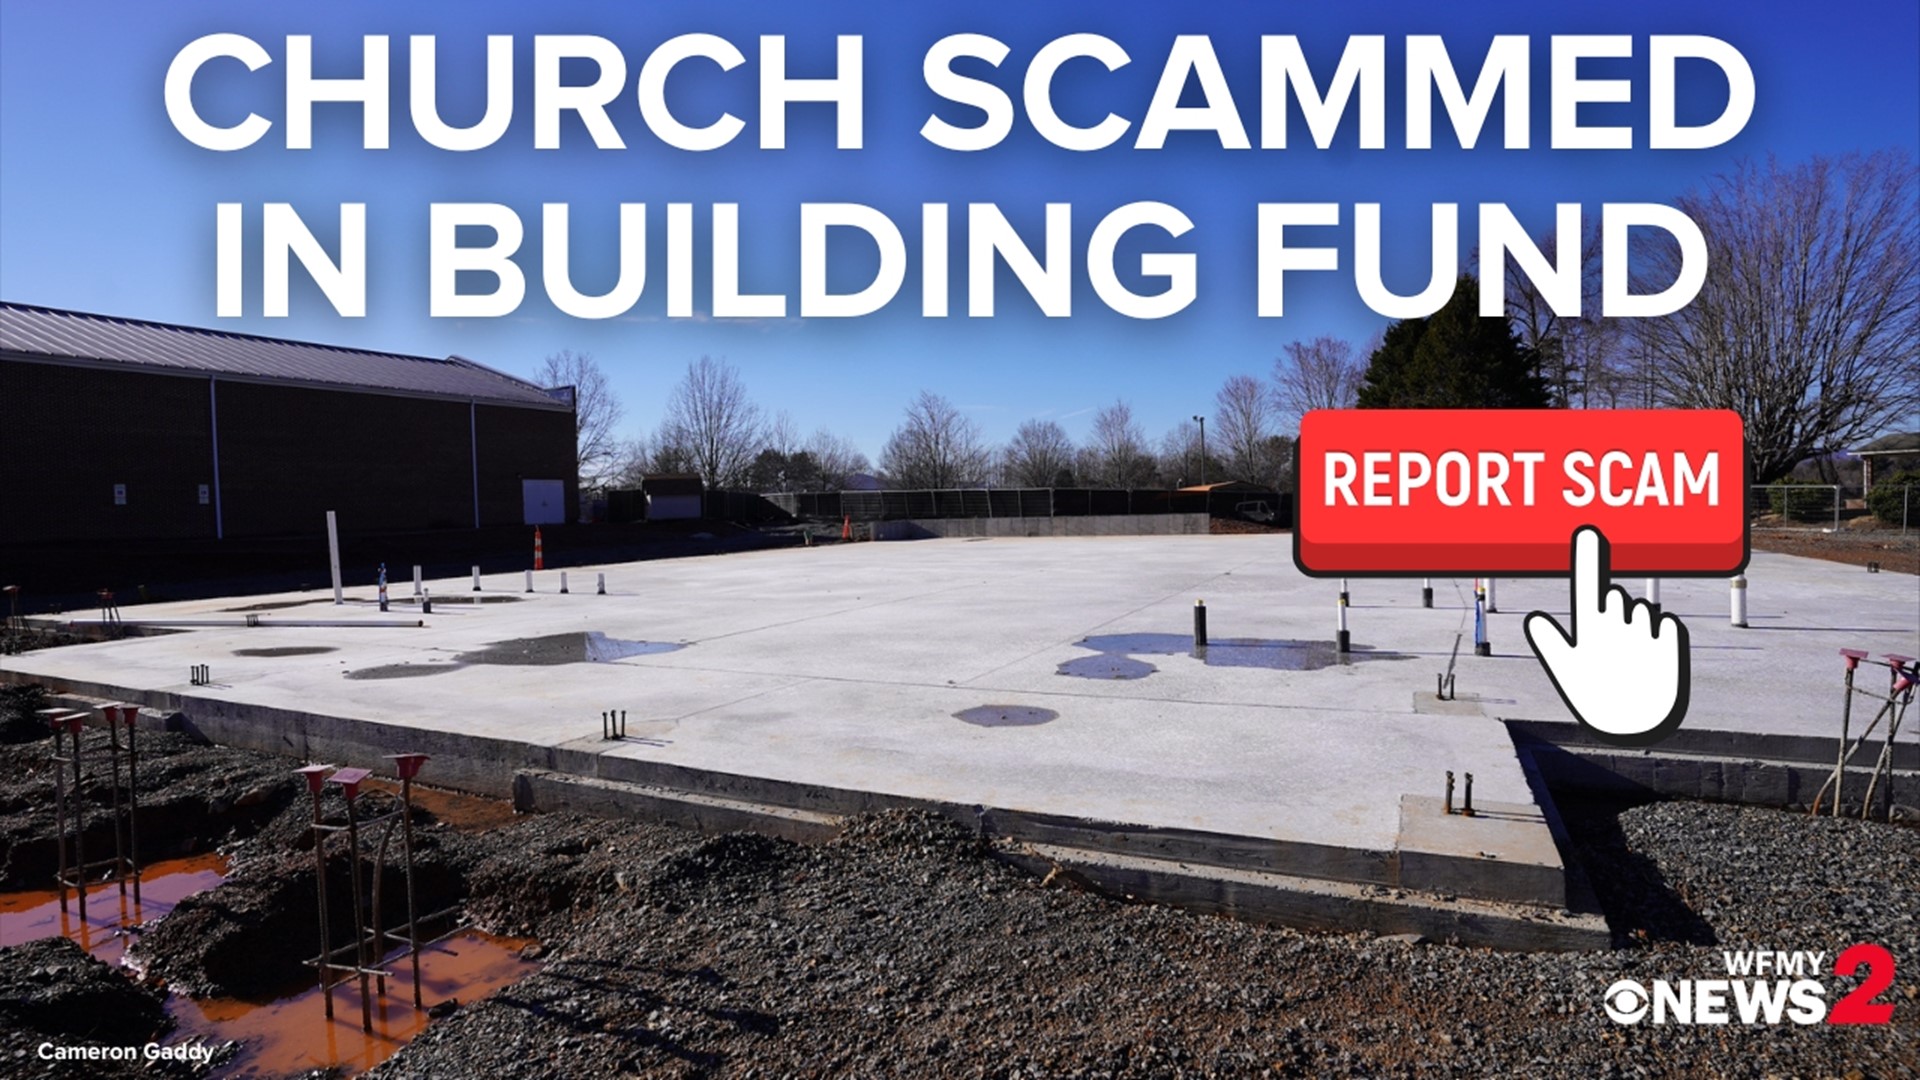 Just when the church had enough money to break ground on a new worship center in September, $793,000 was stolen from them in November.